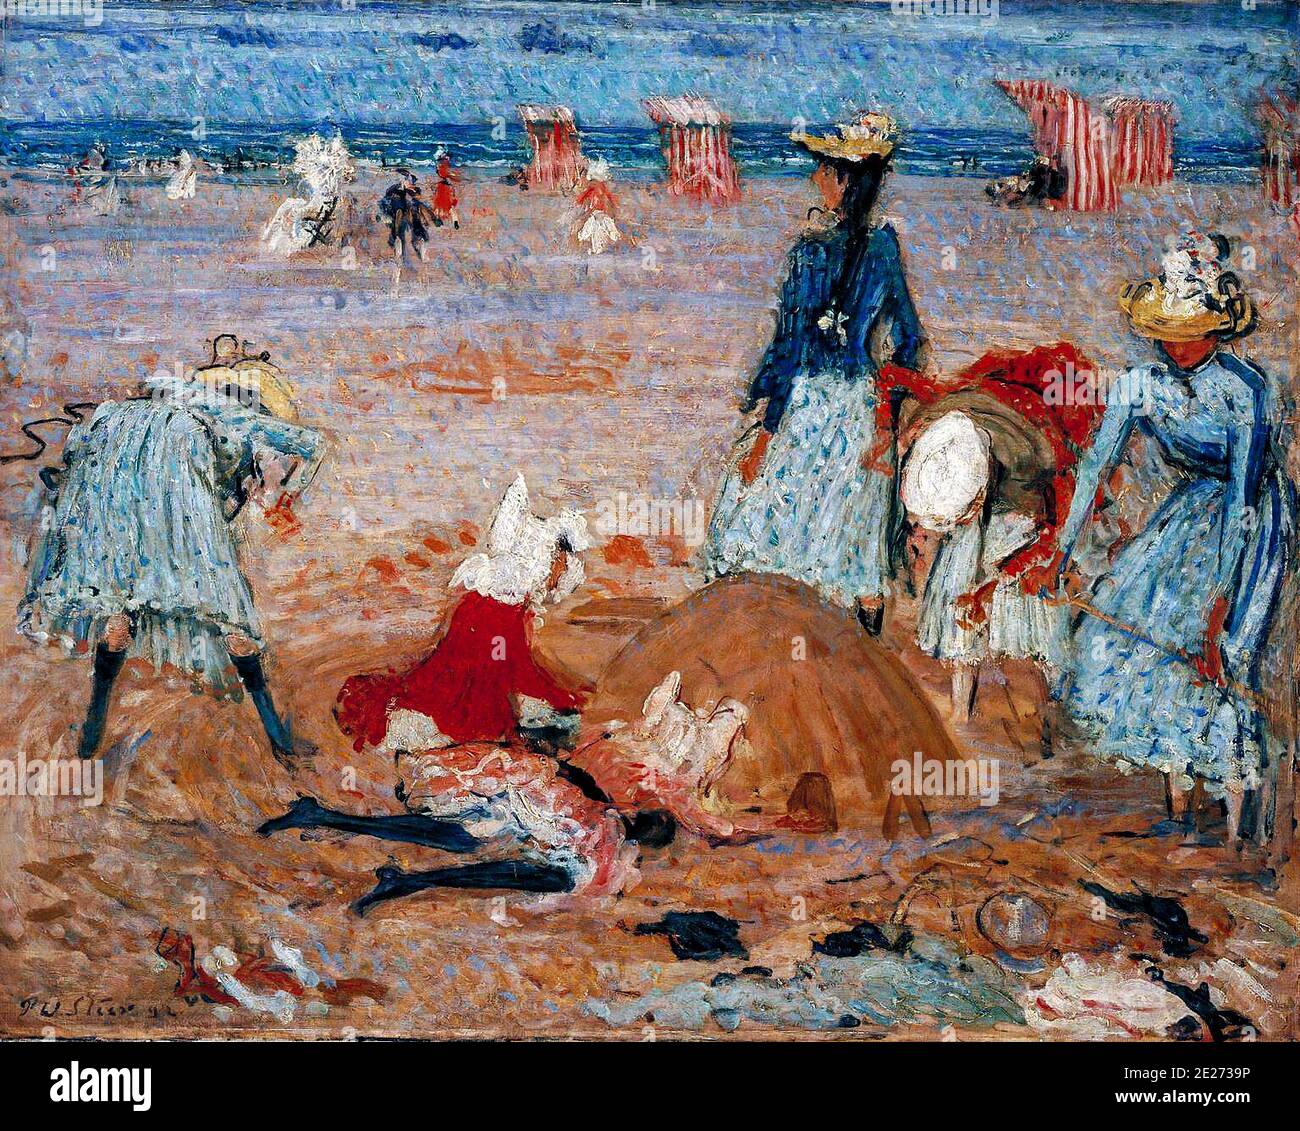 Boulogne Sands 1888-91 Philip Wilson Steer 1860-1942 Presented by the Art Fund 1943 http://www.tate.org.uk/art/work/N05439 Stock Photo